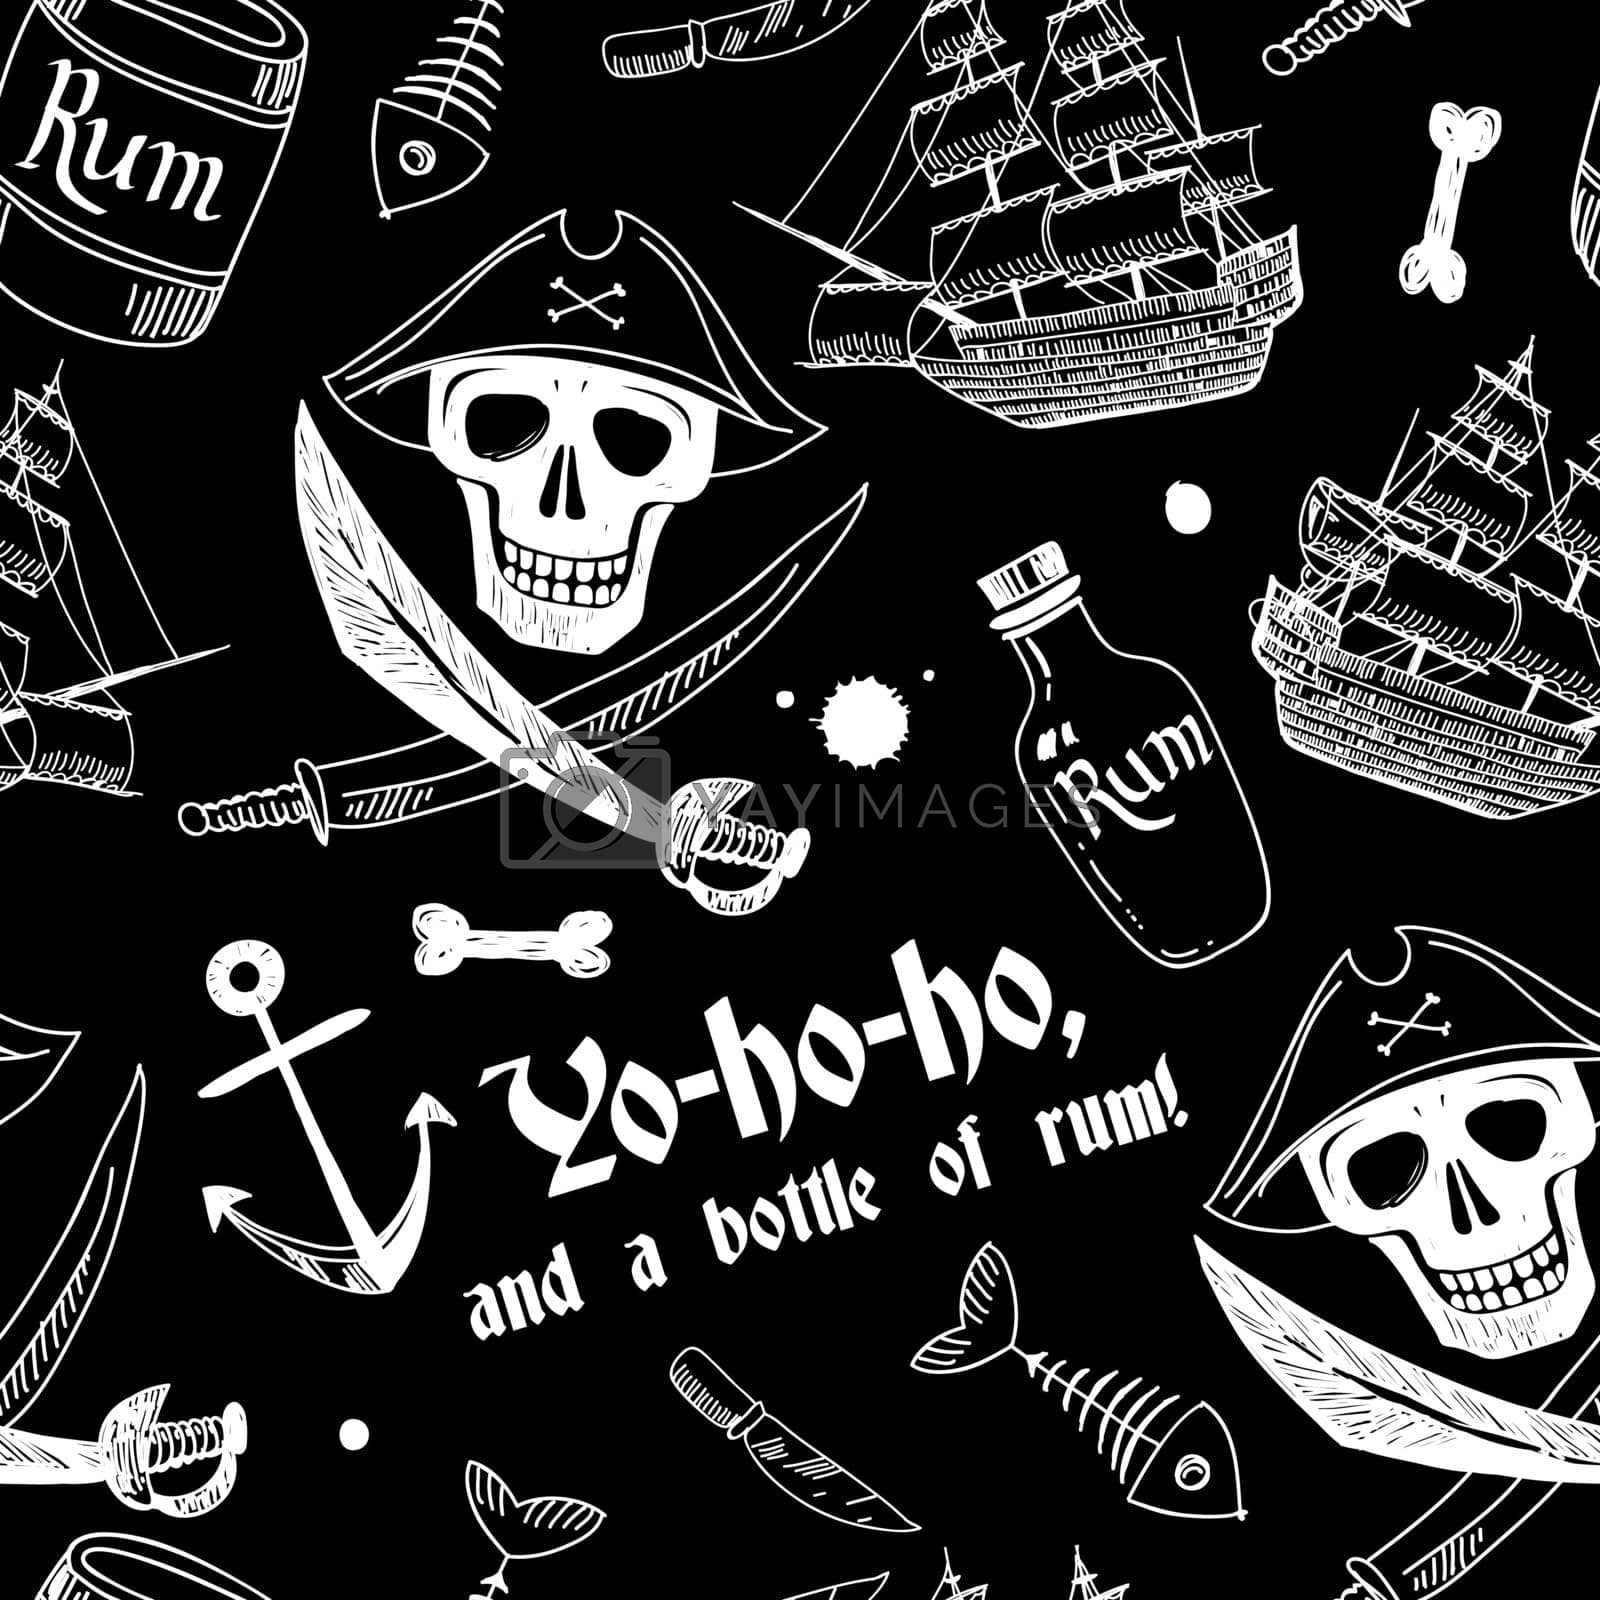 Royalty free image of Pirate Skulls with Crossed Swords Seamless Pattern in Black & WHite by steshnikova